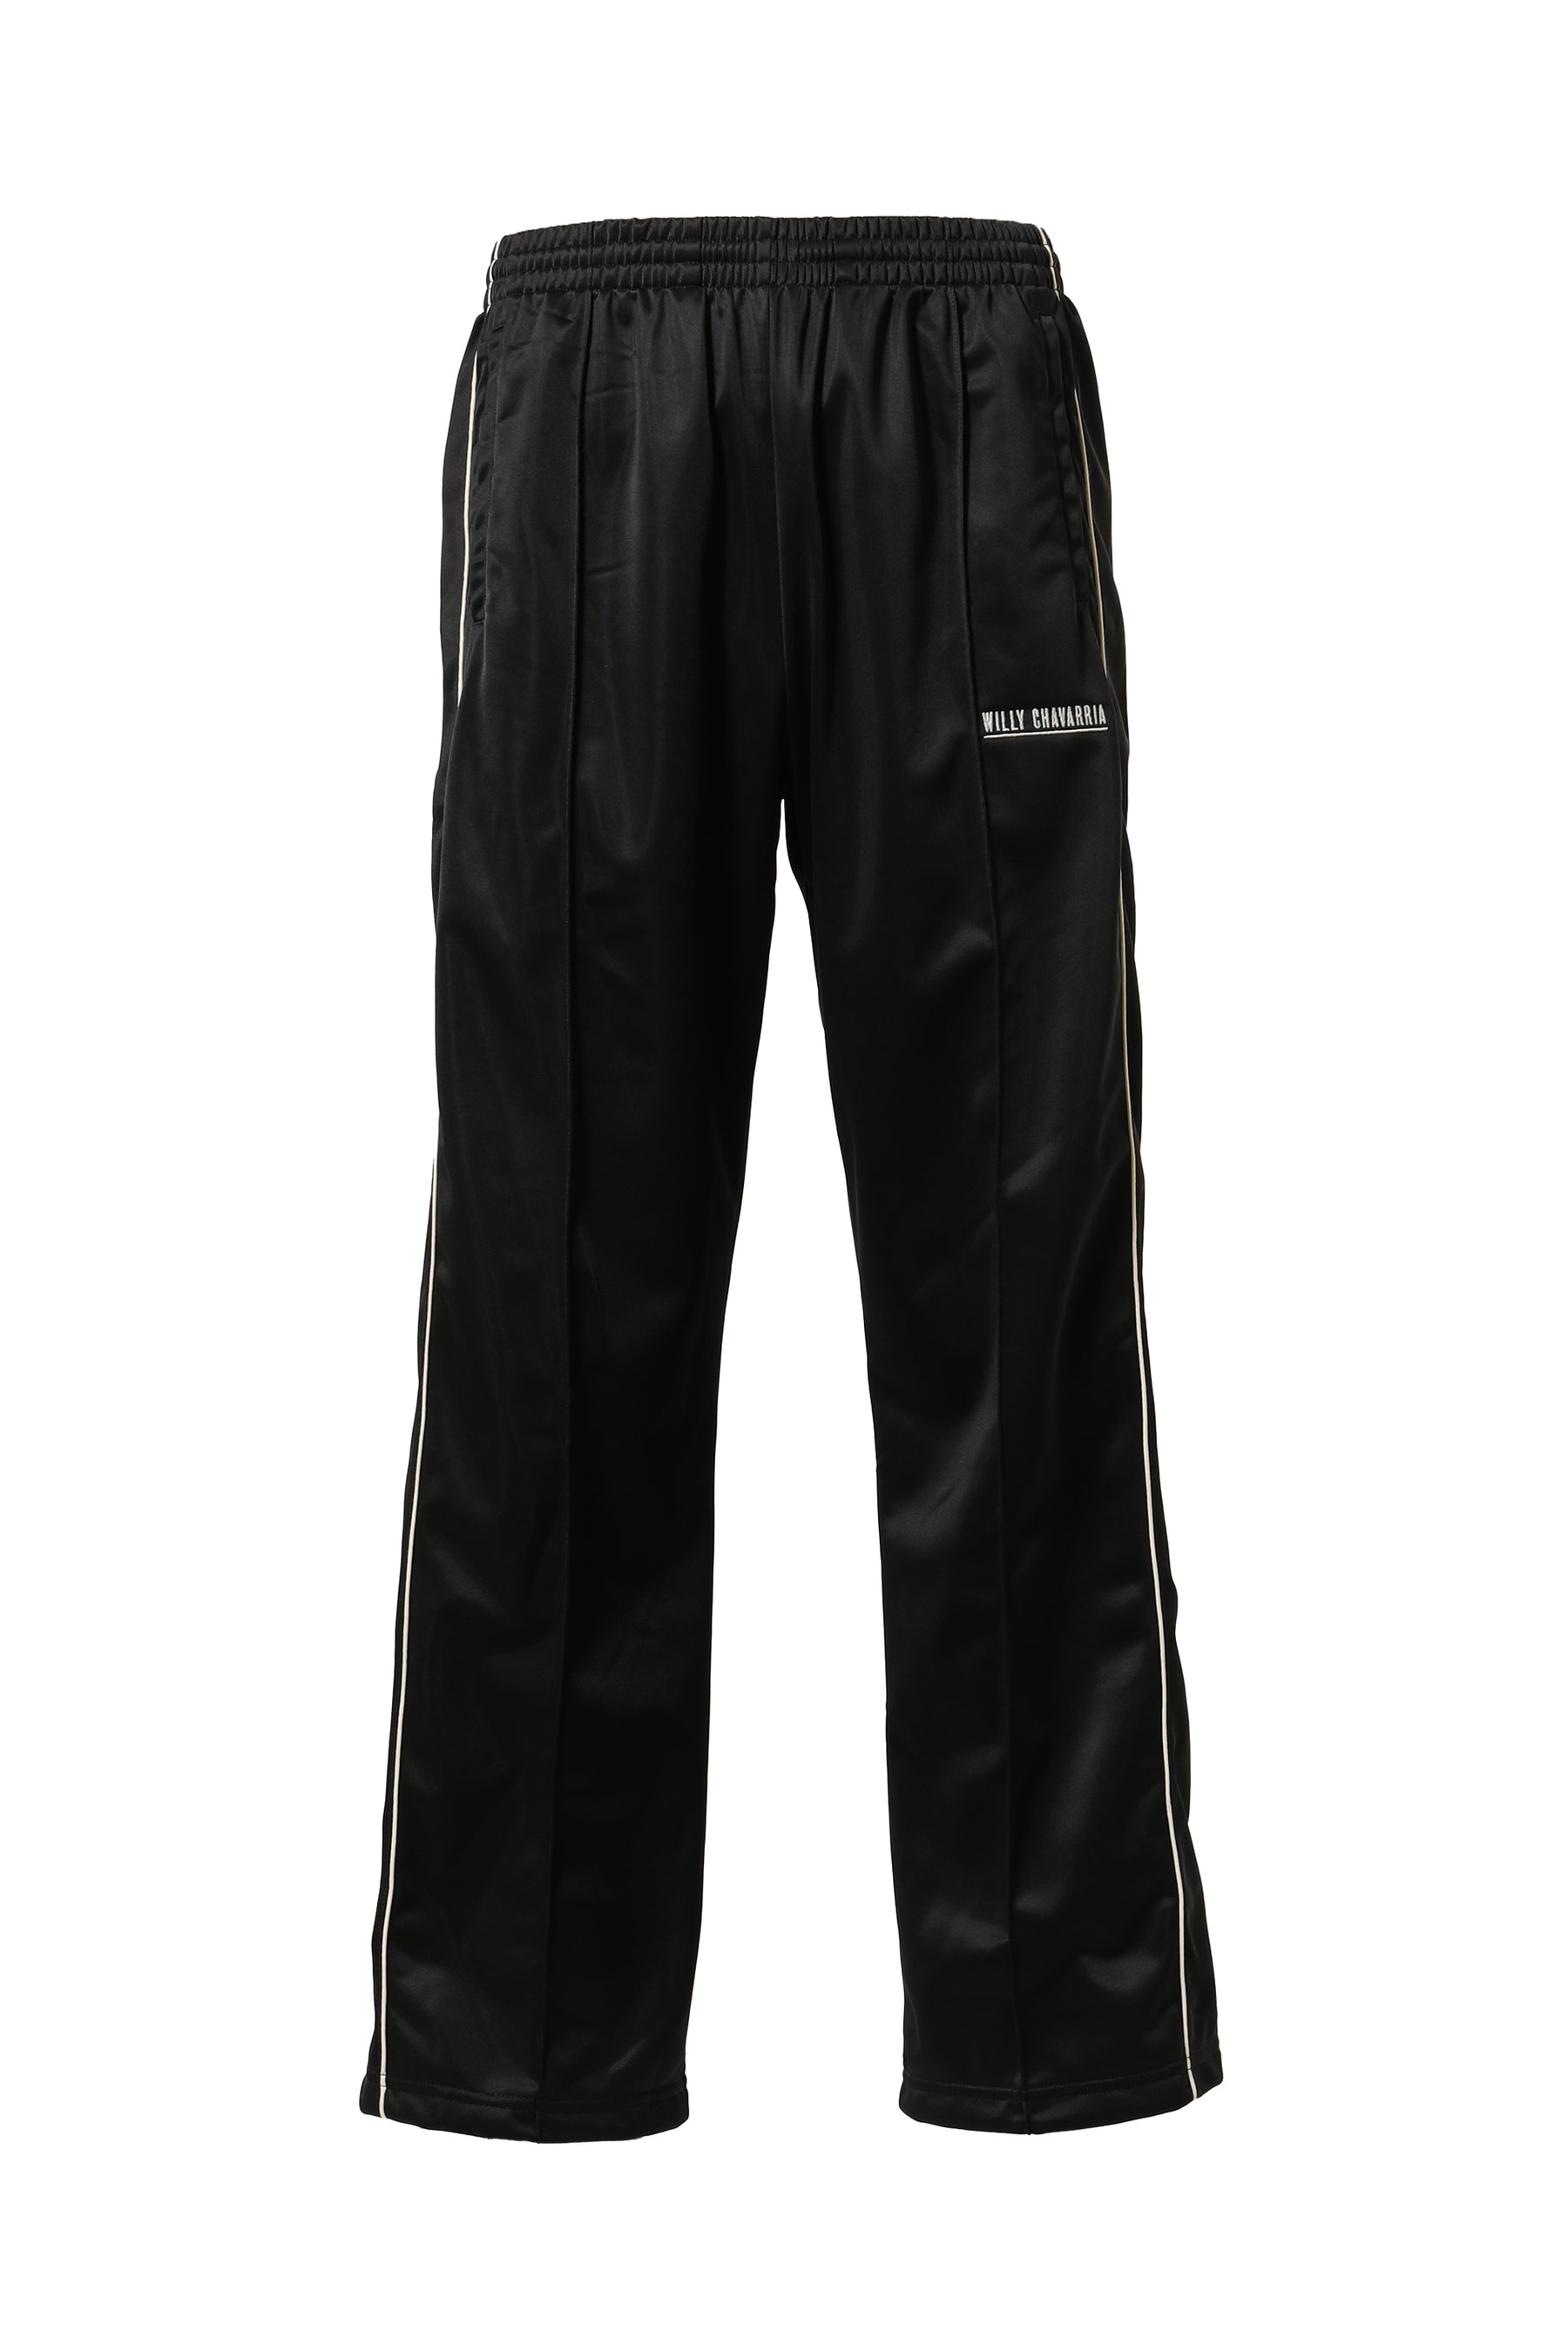 WILLY CHAVARRIA ウィリー チャバリア FW23 NEW TRACK PANTS / BLK -NUBIAN